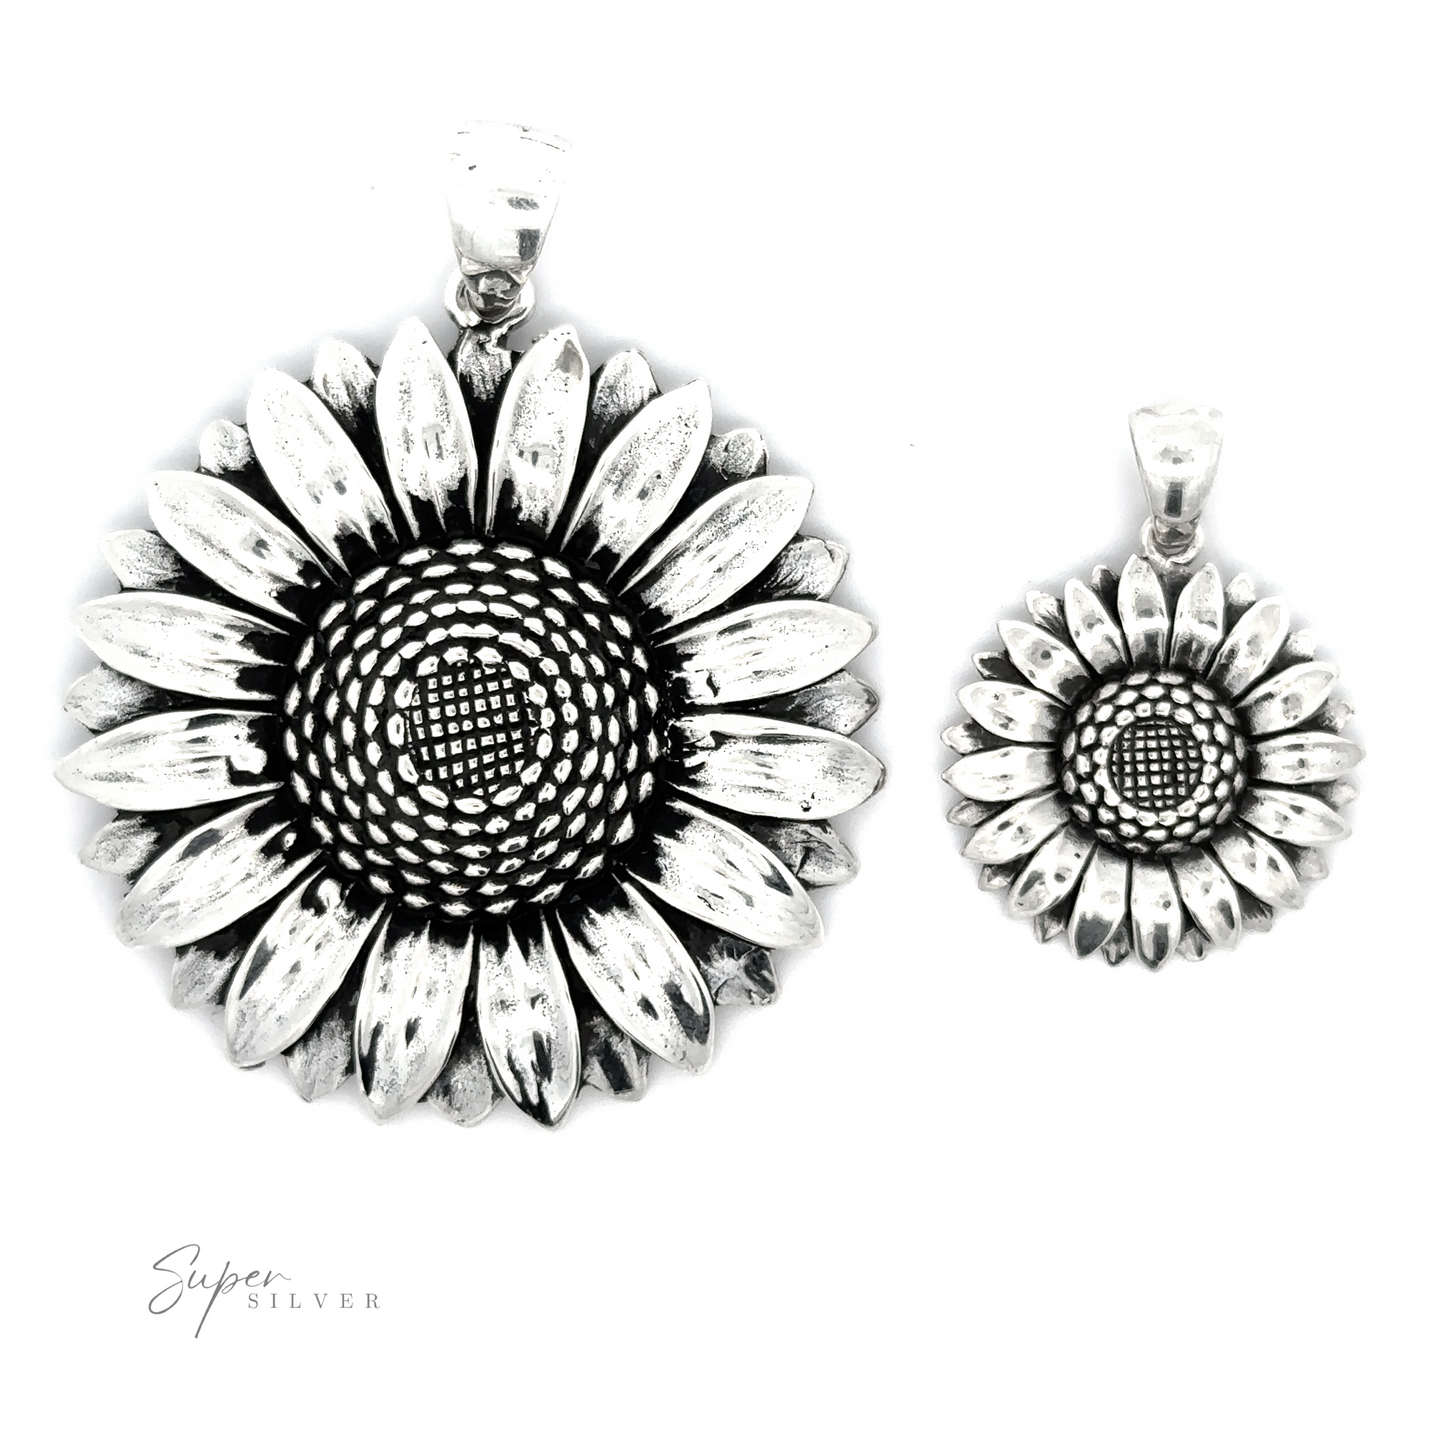 Two Silver Sunflower Pendants of different sizes, featuring intricate petal and center detailing with an oxidized finish, displayed against a white background.